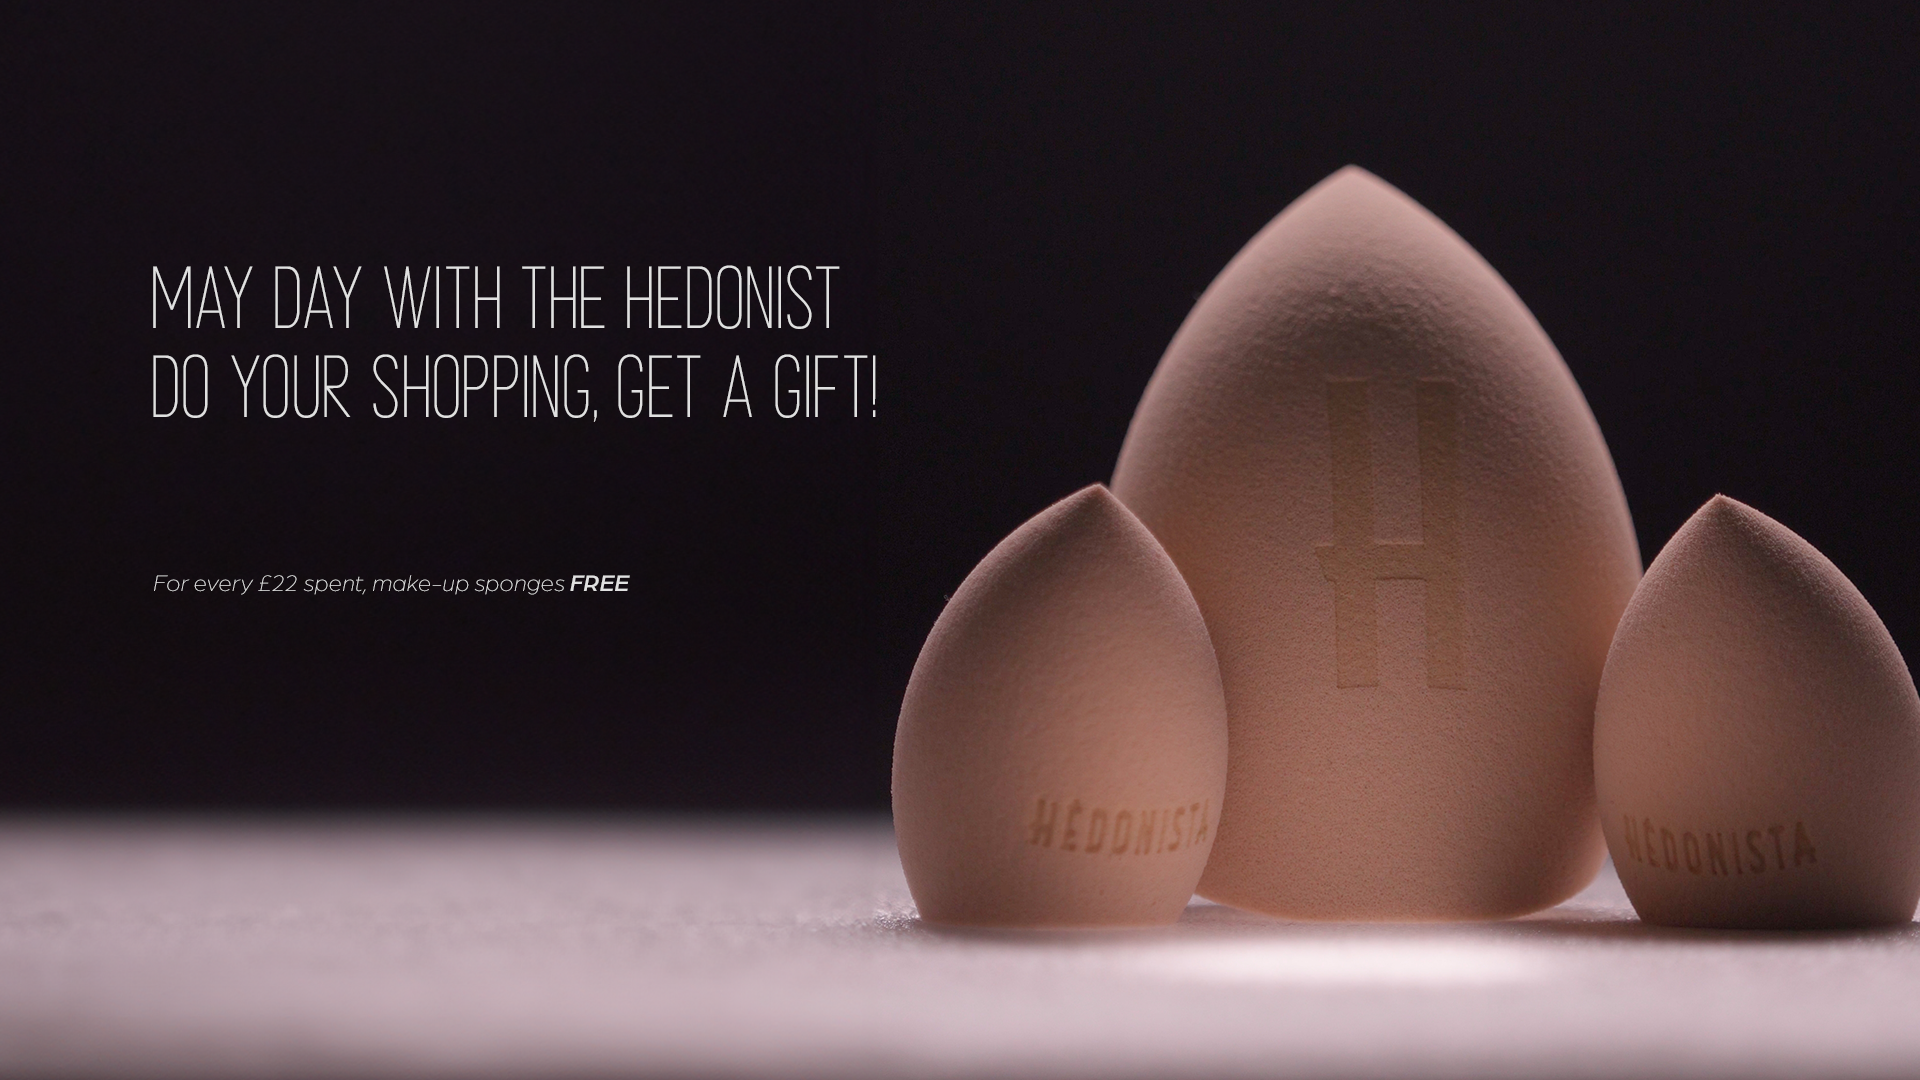 May Day with Hedonist. Do your shopping, get a gift! For every £22 spent, makeup sponges FREE.